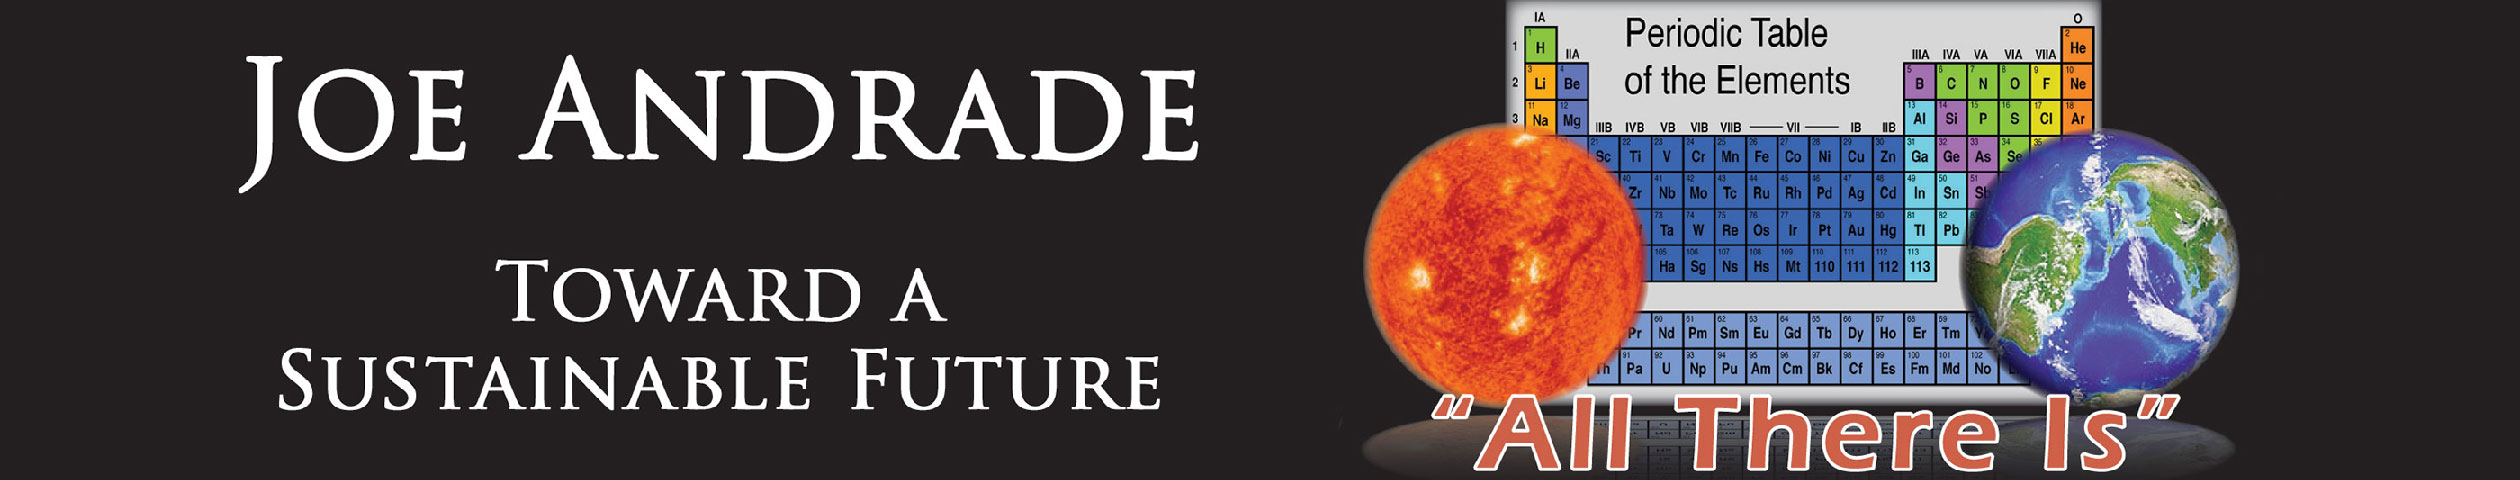 Joe Andrade, Toward a Sustainable Future. (Image of Sun, Earth and periodic table, with text "All There Is")